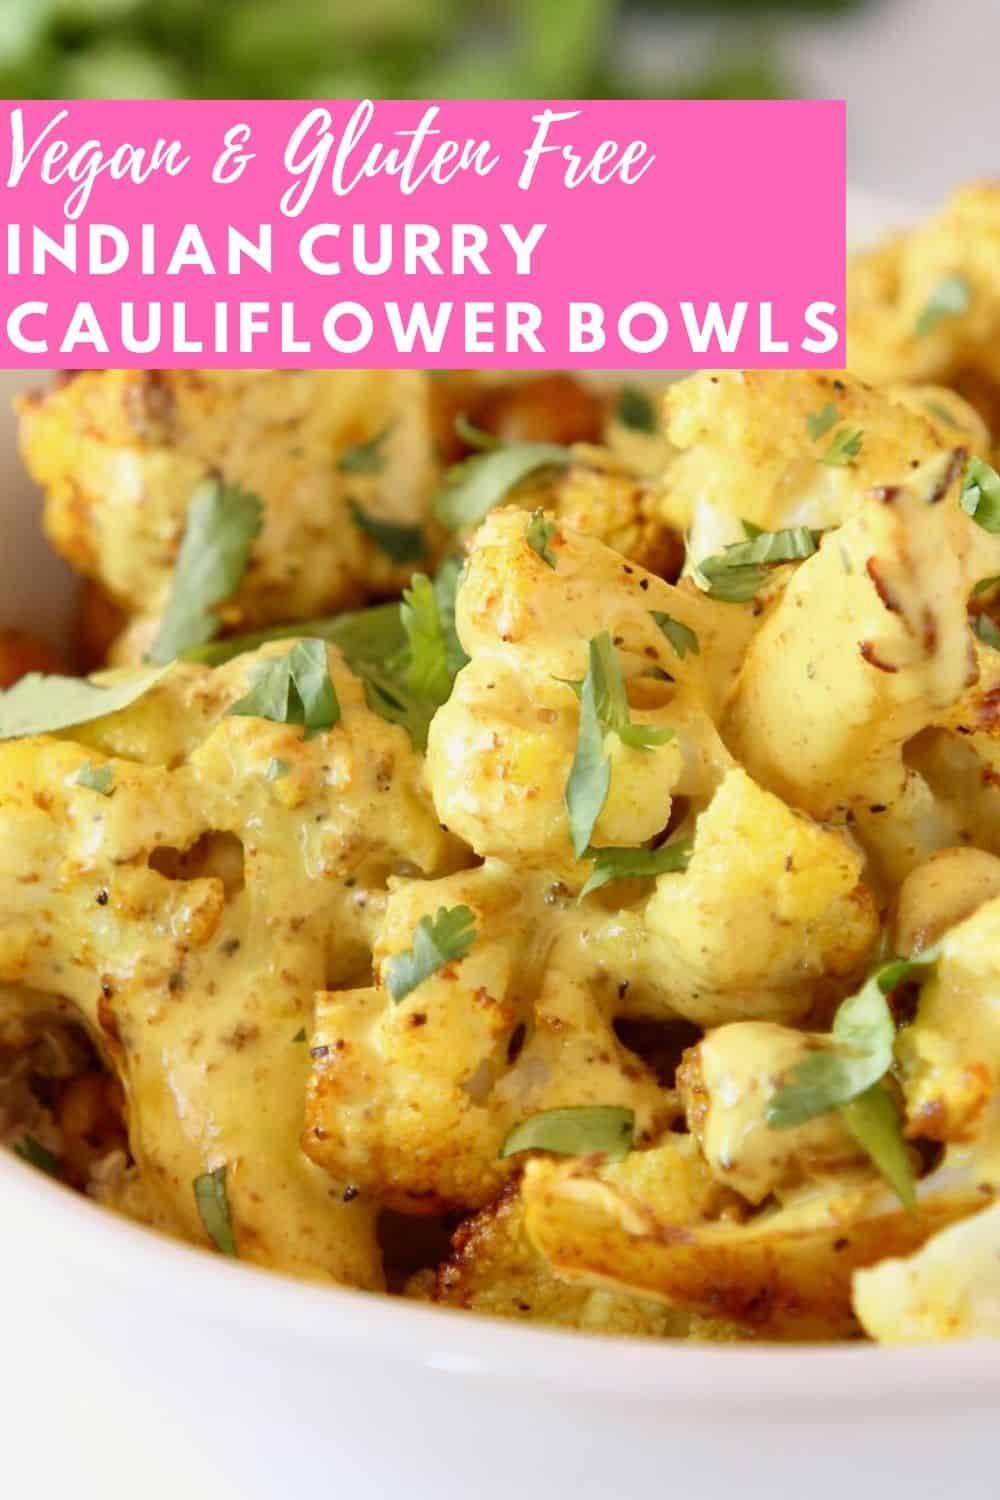 Roasted Indian Cauliflower Bowl - Bowls Are The New Plates